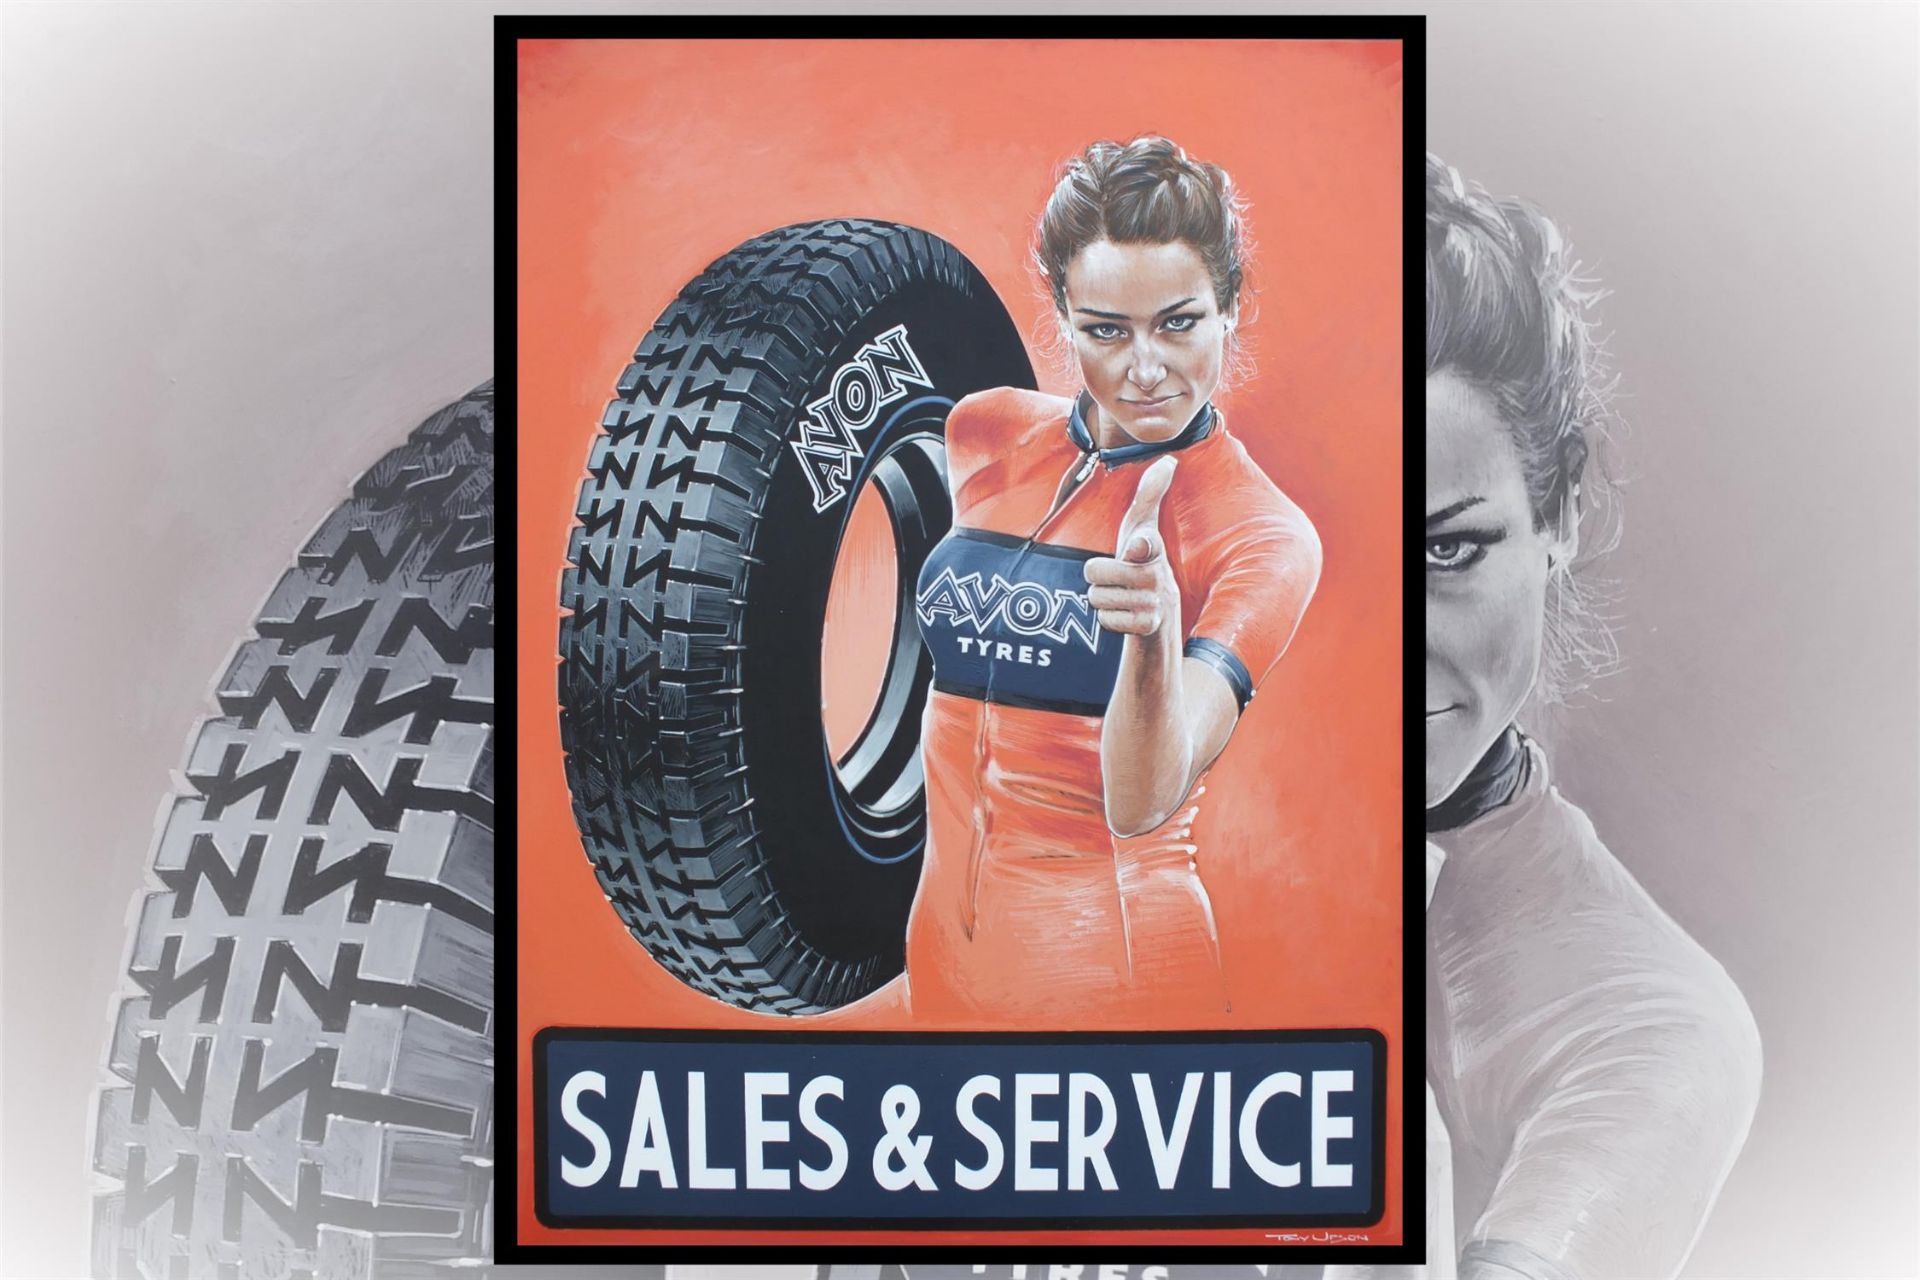 Avon Tyres-Sales and Service. Acrylic on Canvas by Tony Upson